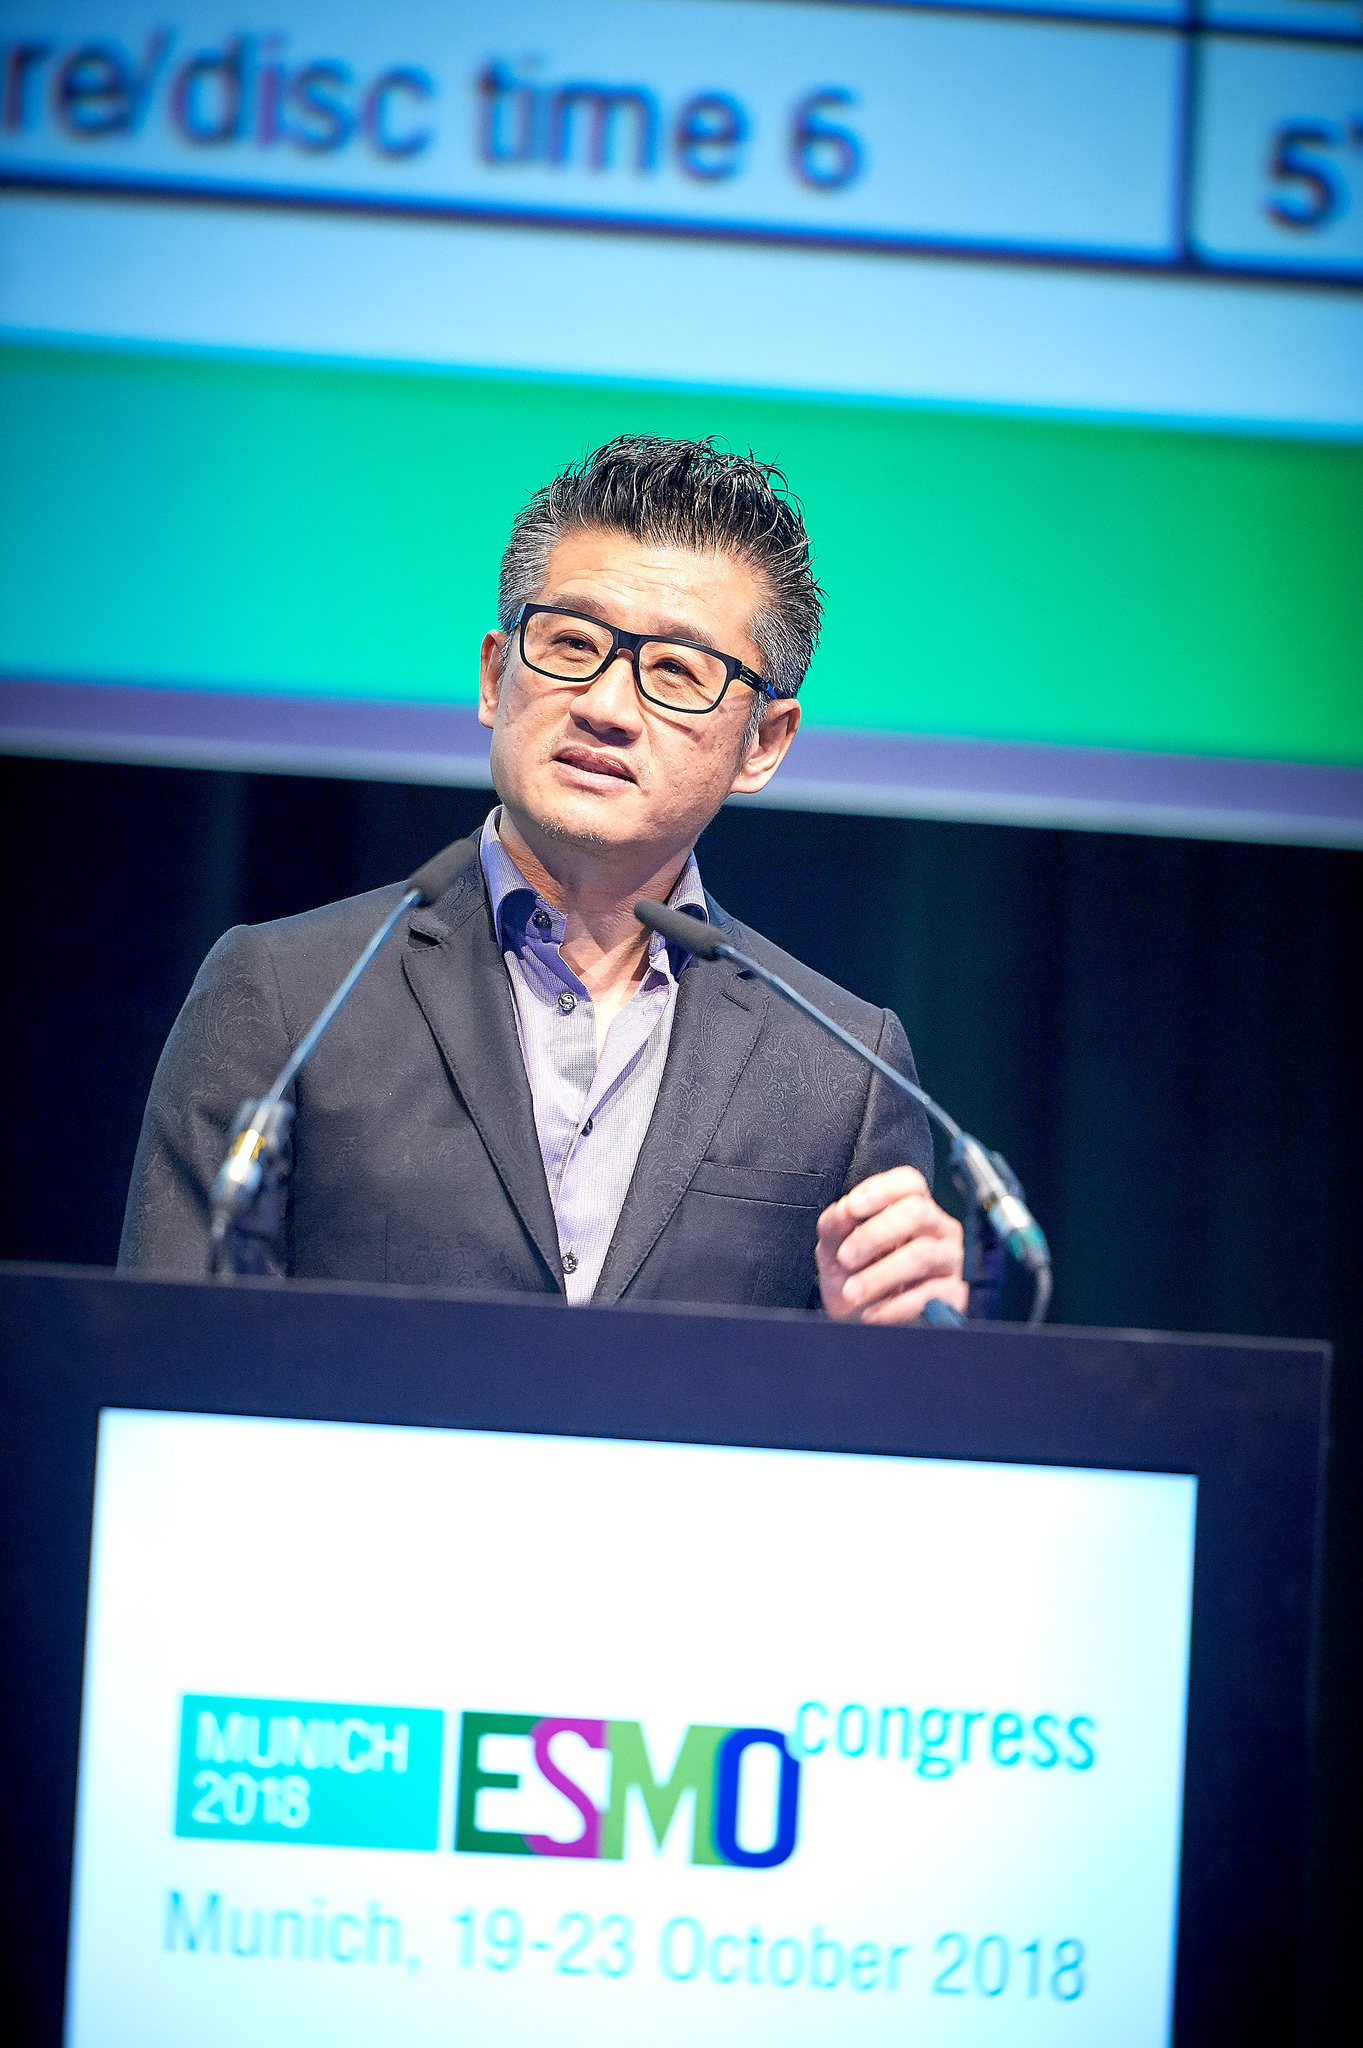 At the award presentation ceremony, Professor Tony Mok highlighted the significance of “friendship” and “collaboration”. He said, “As a clinician-scientist, my duty is to create hope for patients. My achievement is to create hope with likeminded friends.” (Photo courtesy of the European Society for Medical Oncology)